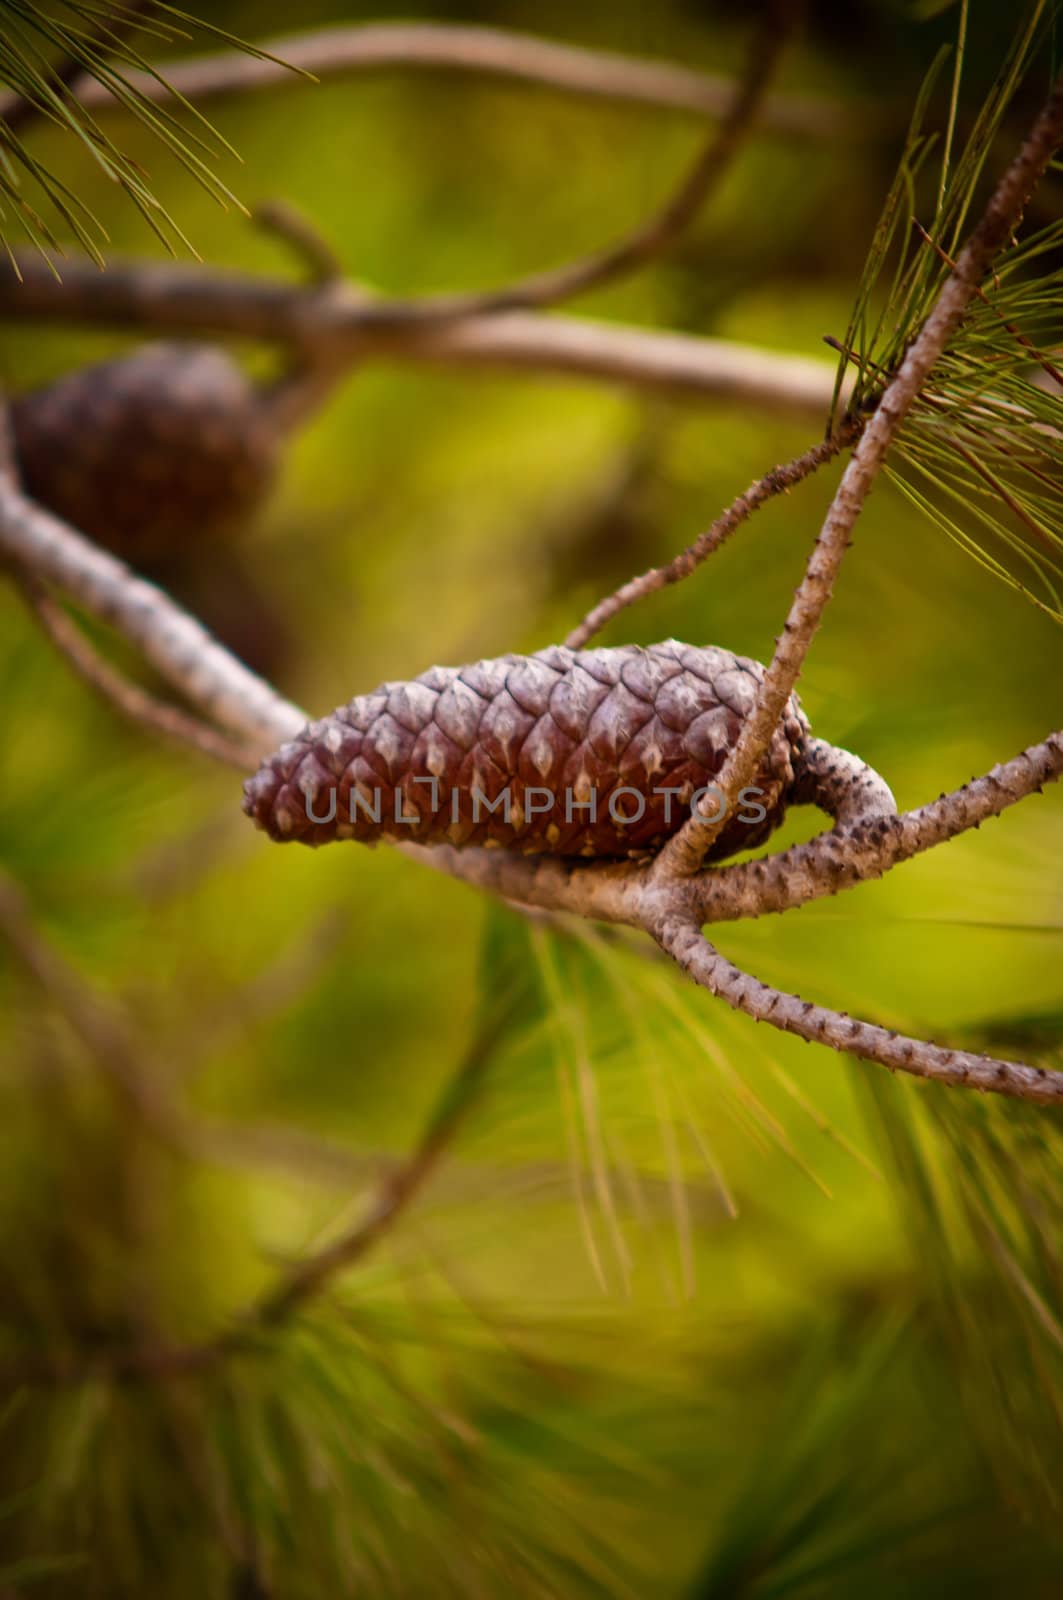 Pine Cone And Branches .